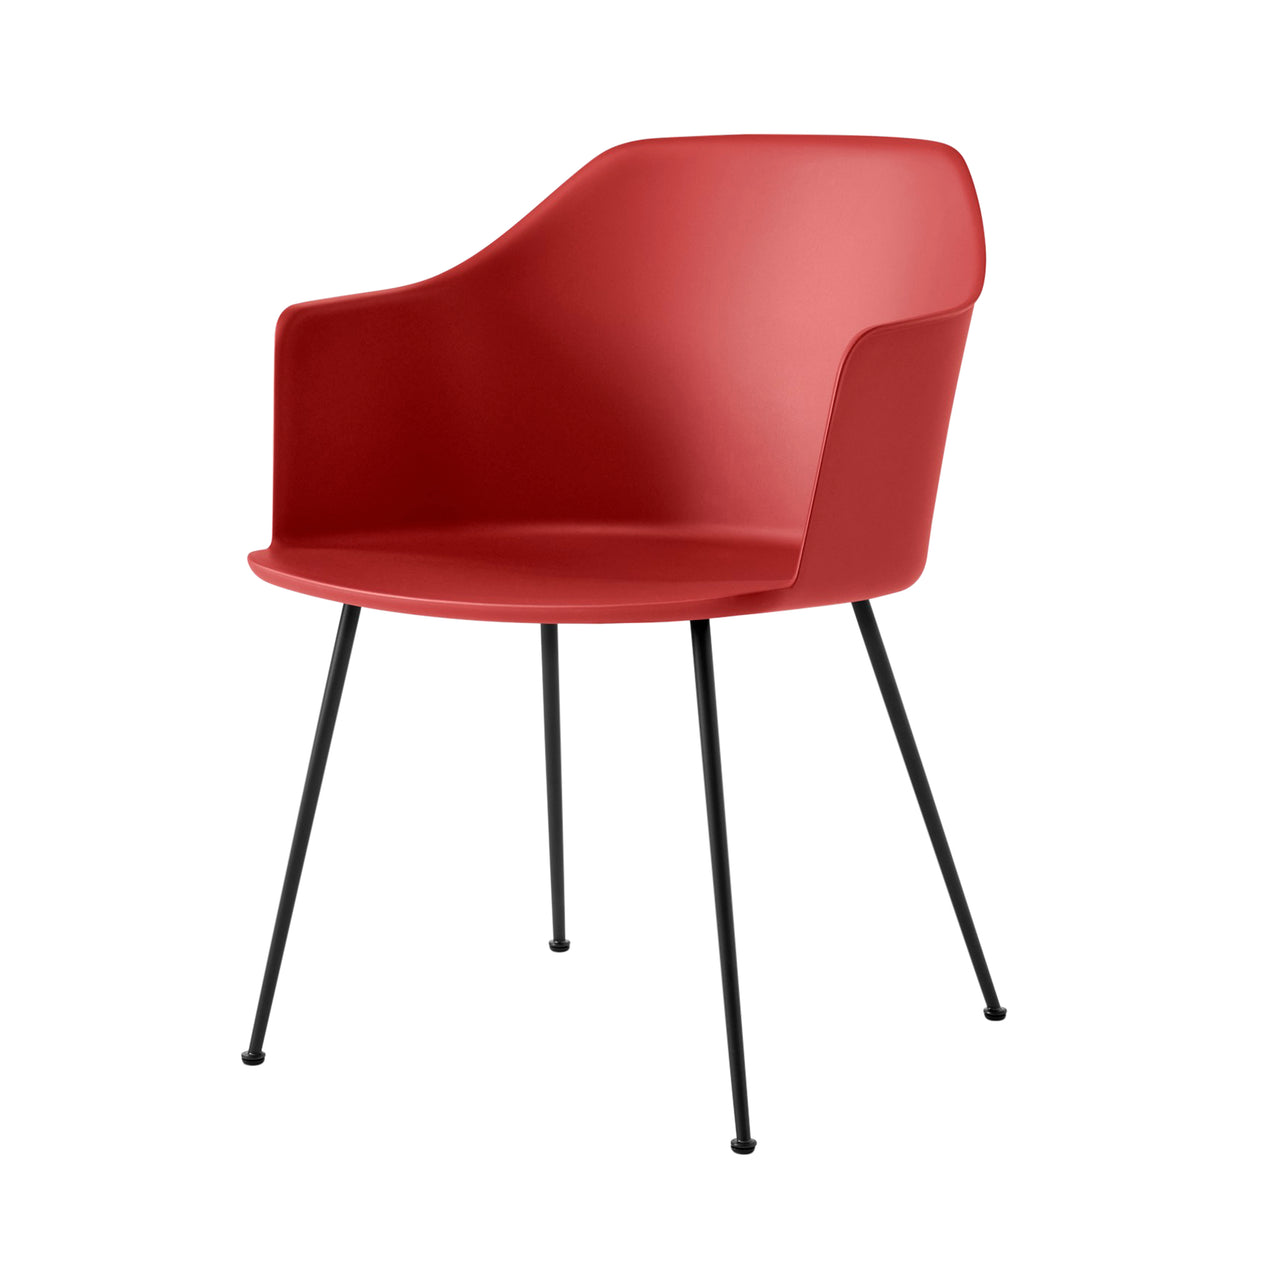 Rely Armchair HW33: Vermilion Red + Black